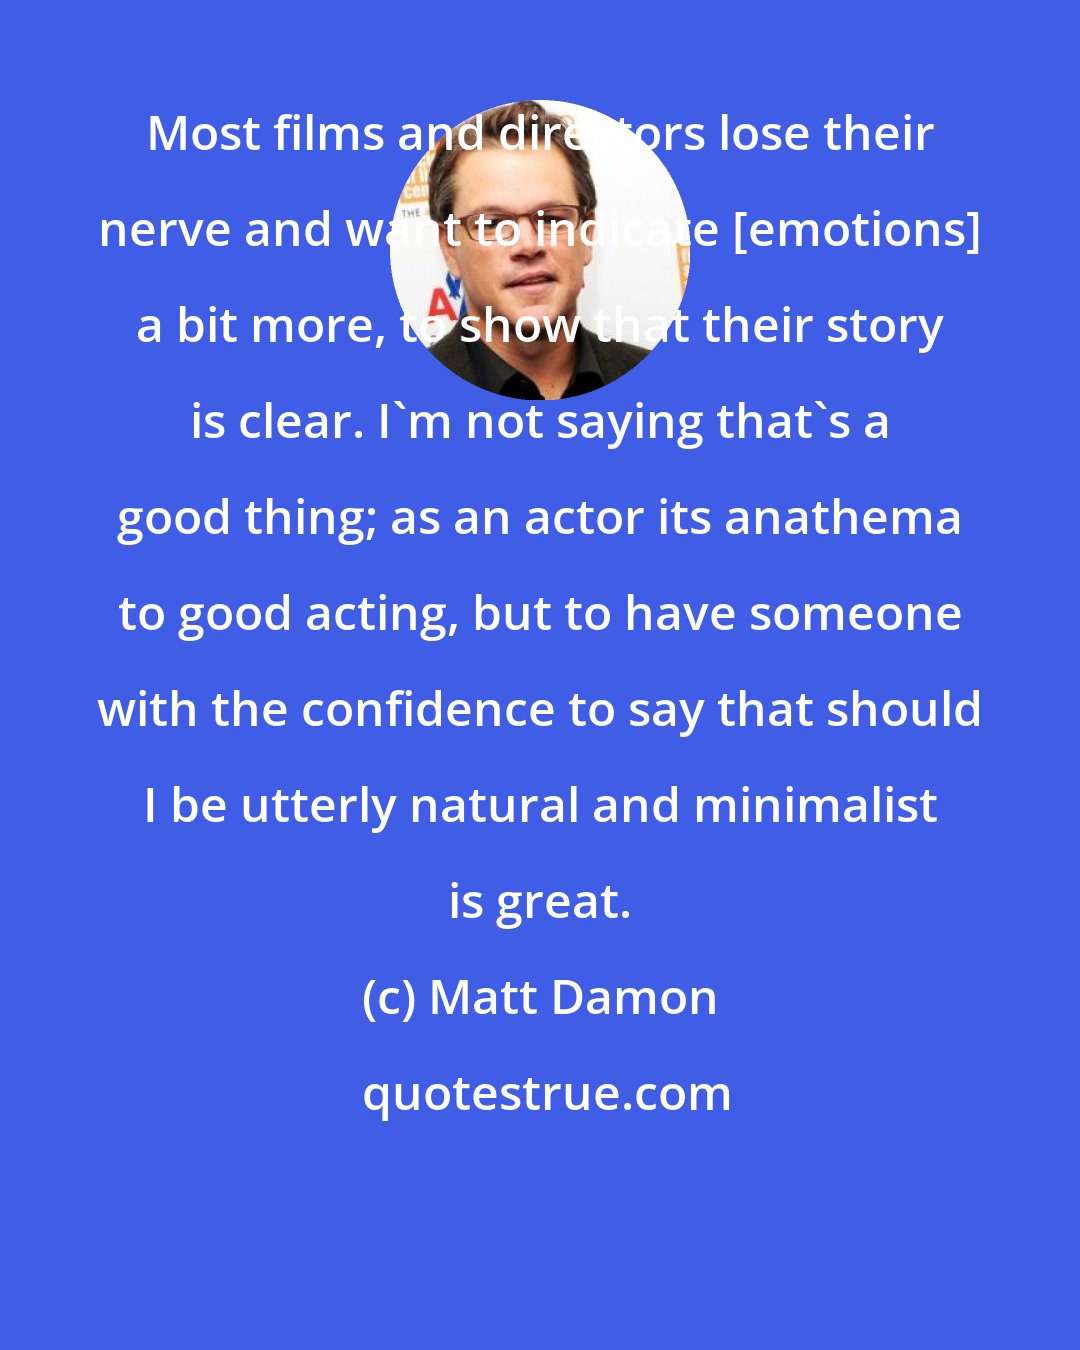 Matt Damon: Most films and directors lose their nerve and want to indicate [emotions] a bit more, to show that their story is clear. I'm not saying that's a good thing; as an actor its anathema to good acting, but to have someone with the confidence to say that should I be utterly natural and minimalist is great.